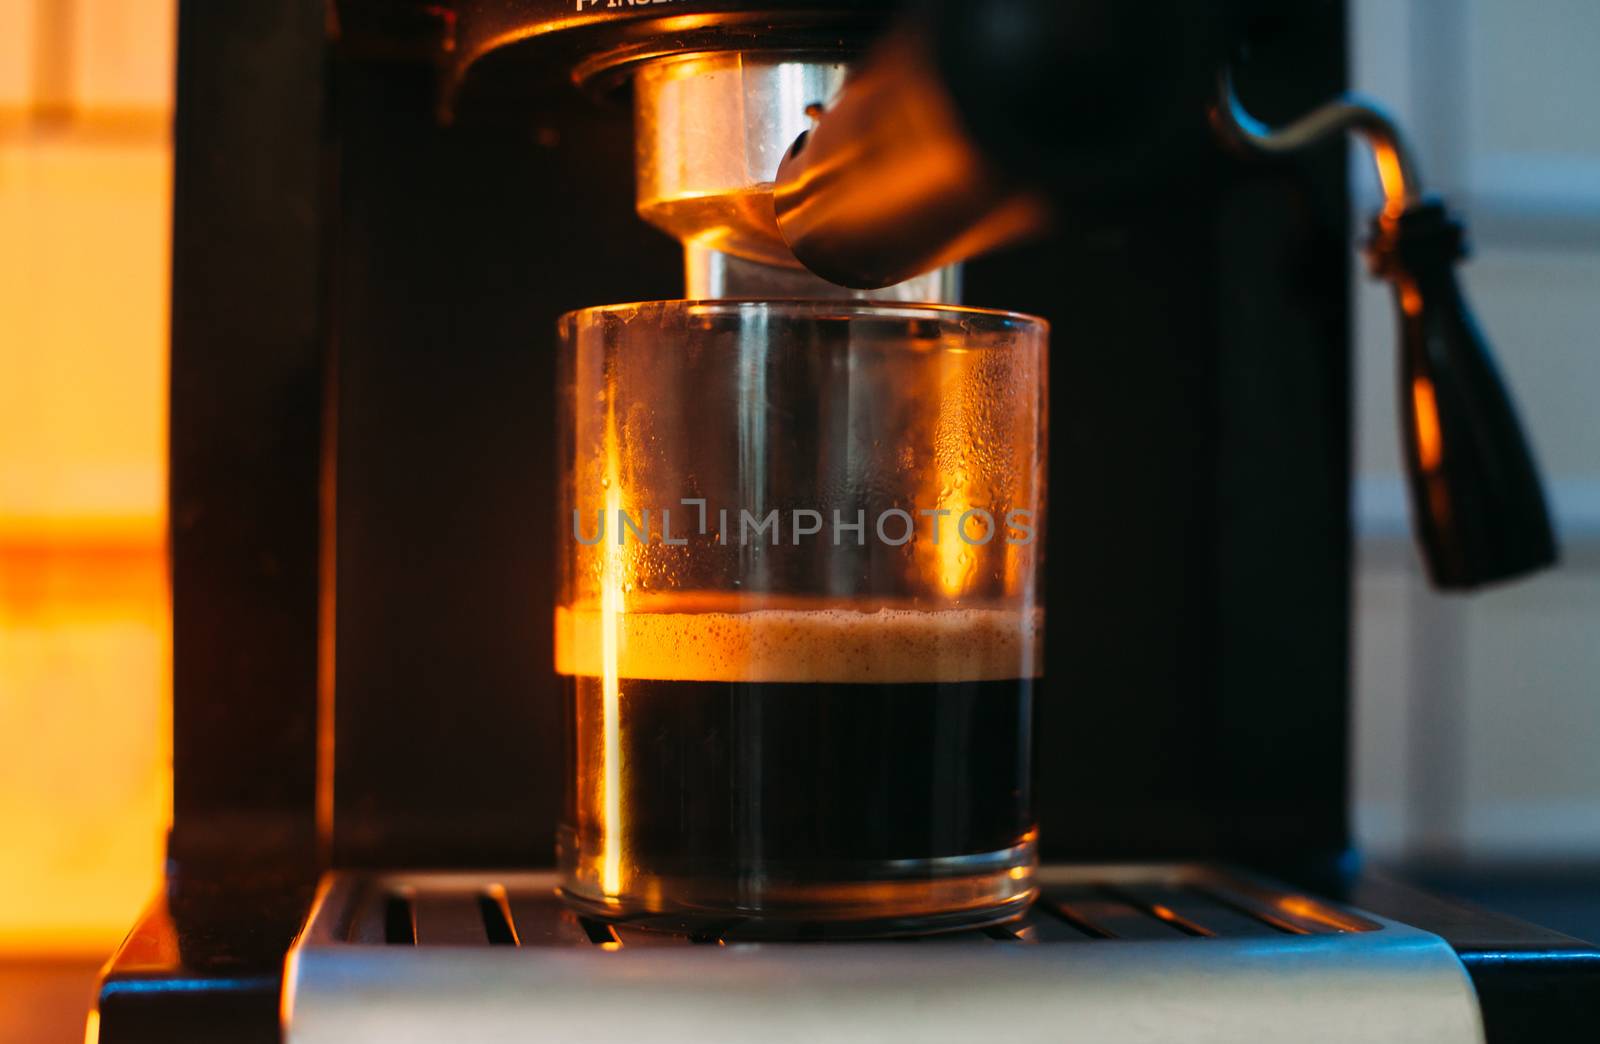 A filling glass is standing in a coffee machine with a yellow li by Opikanets